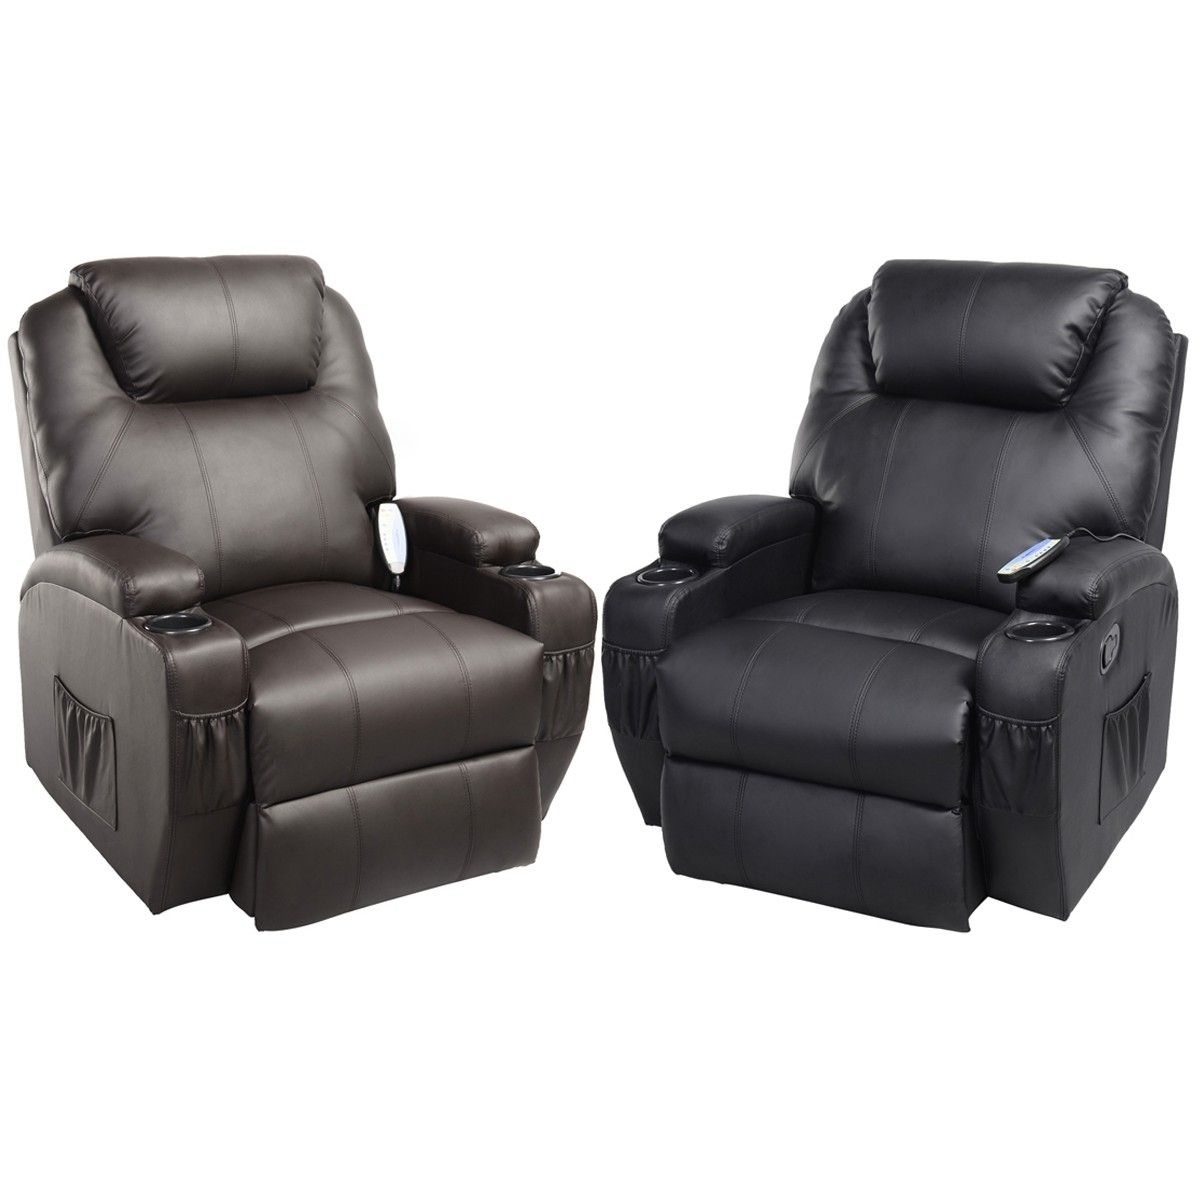 Massage Recliner Sofa Chair Deluxe Ergonomic Lounge Heated W Throughout Well Known Ergonomic Sofas And Chairs (View 1 of 15)